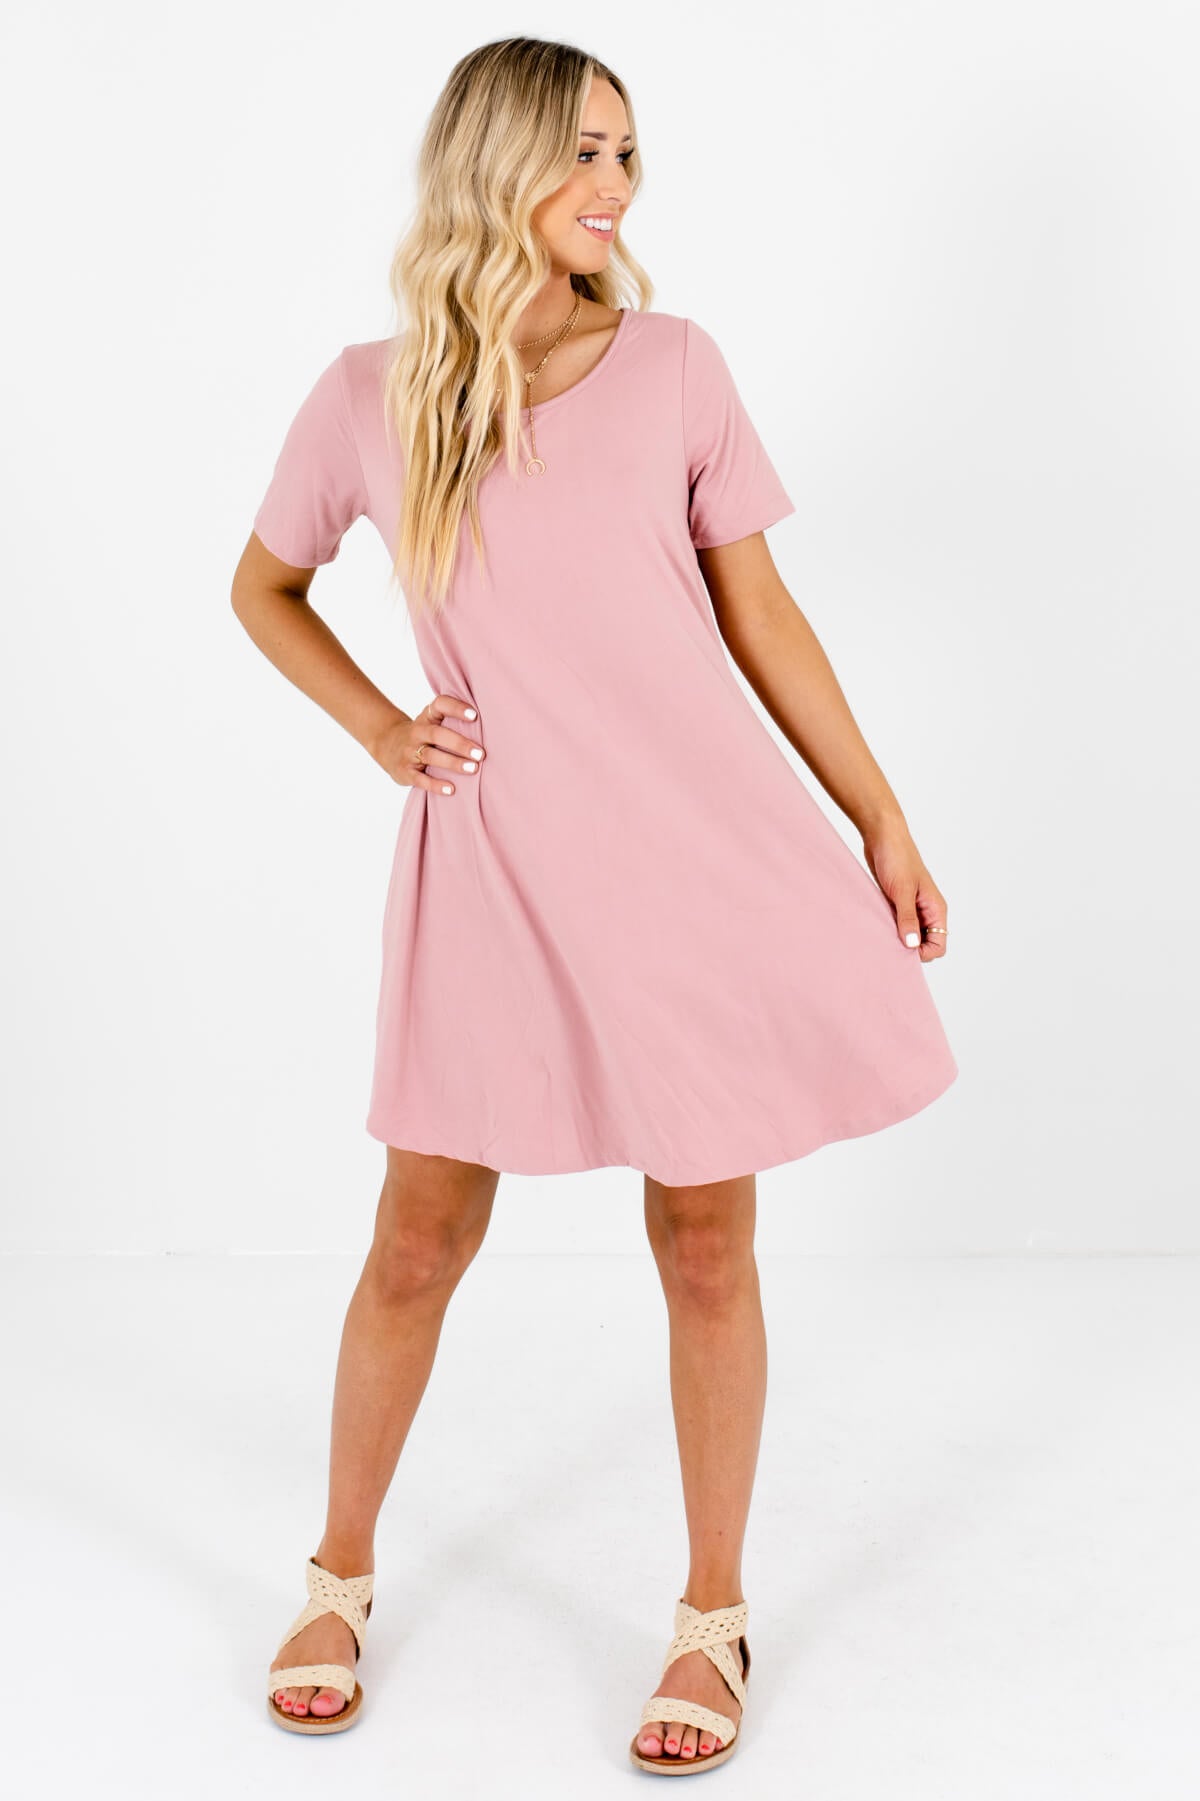 Dusty Rose Pink Soft Boutique Mini Dresses with Pockets